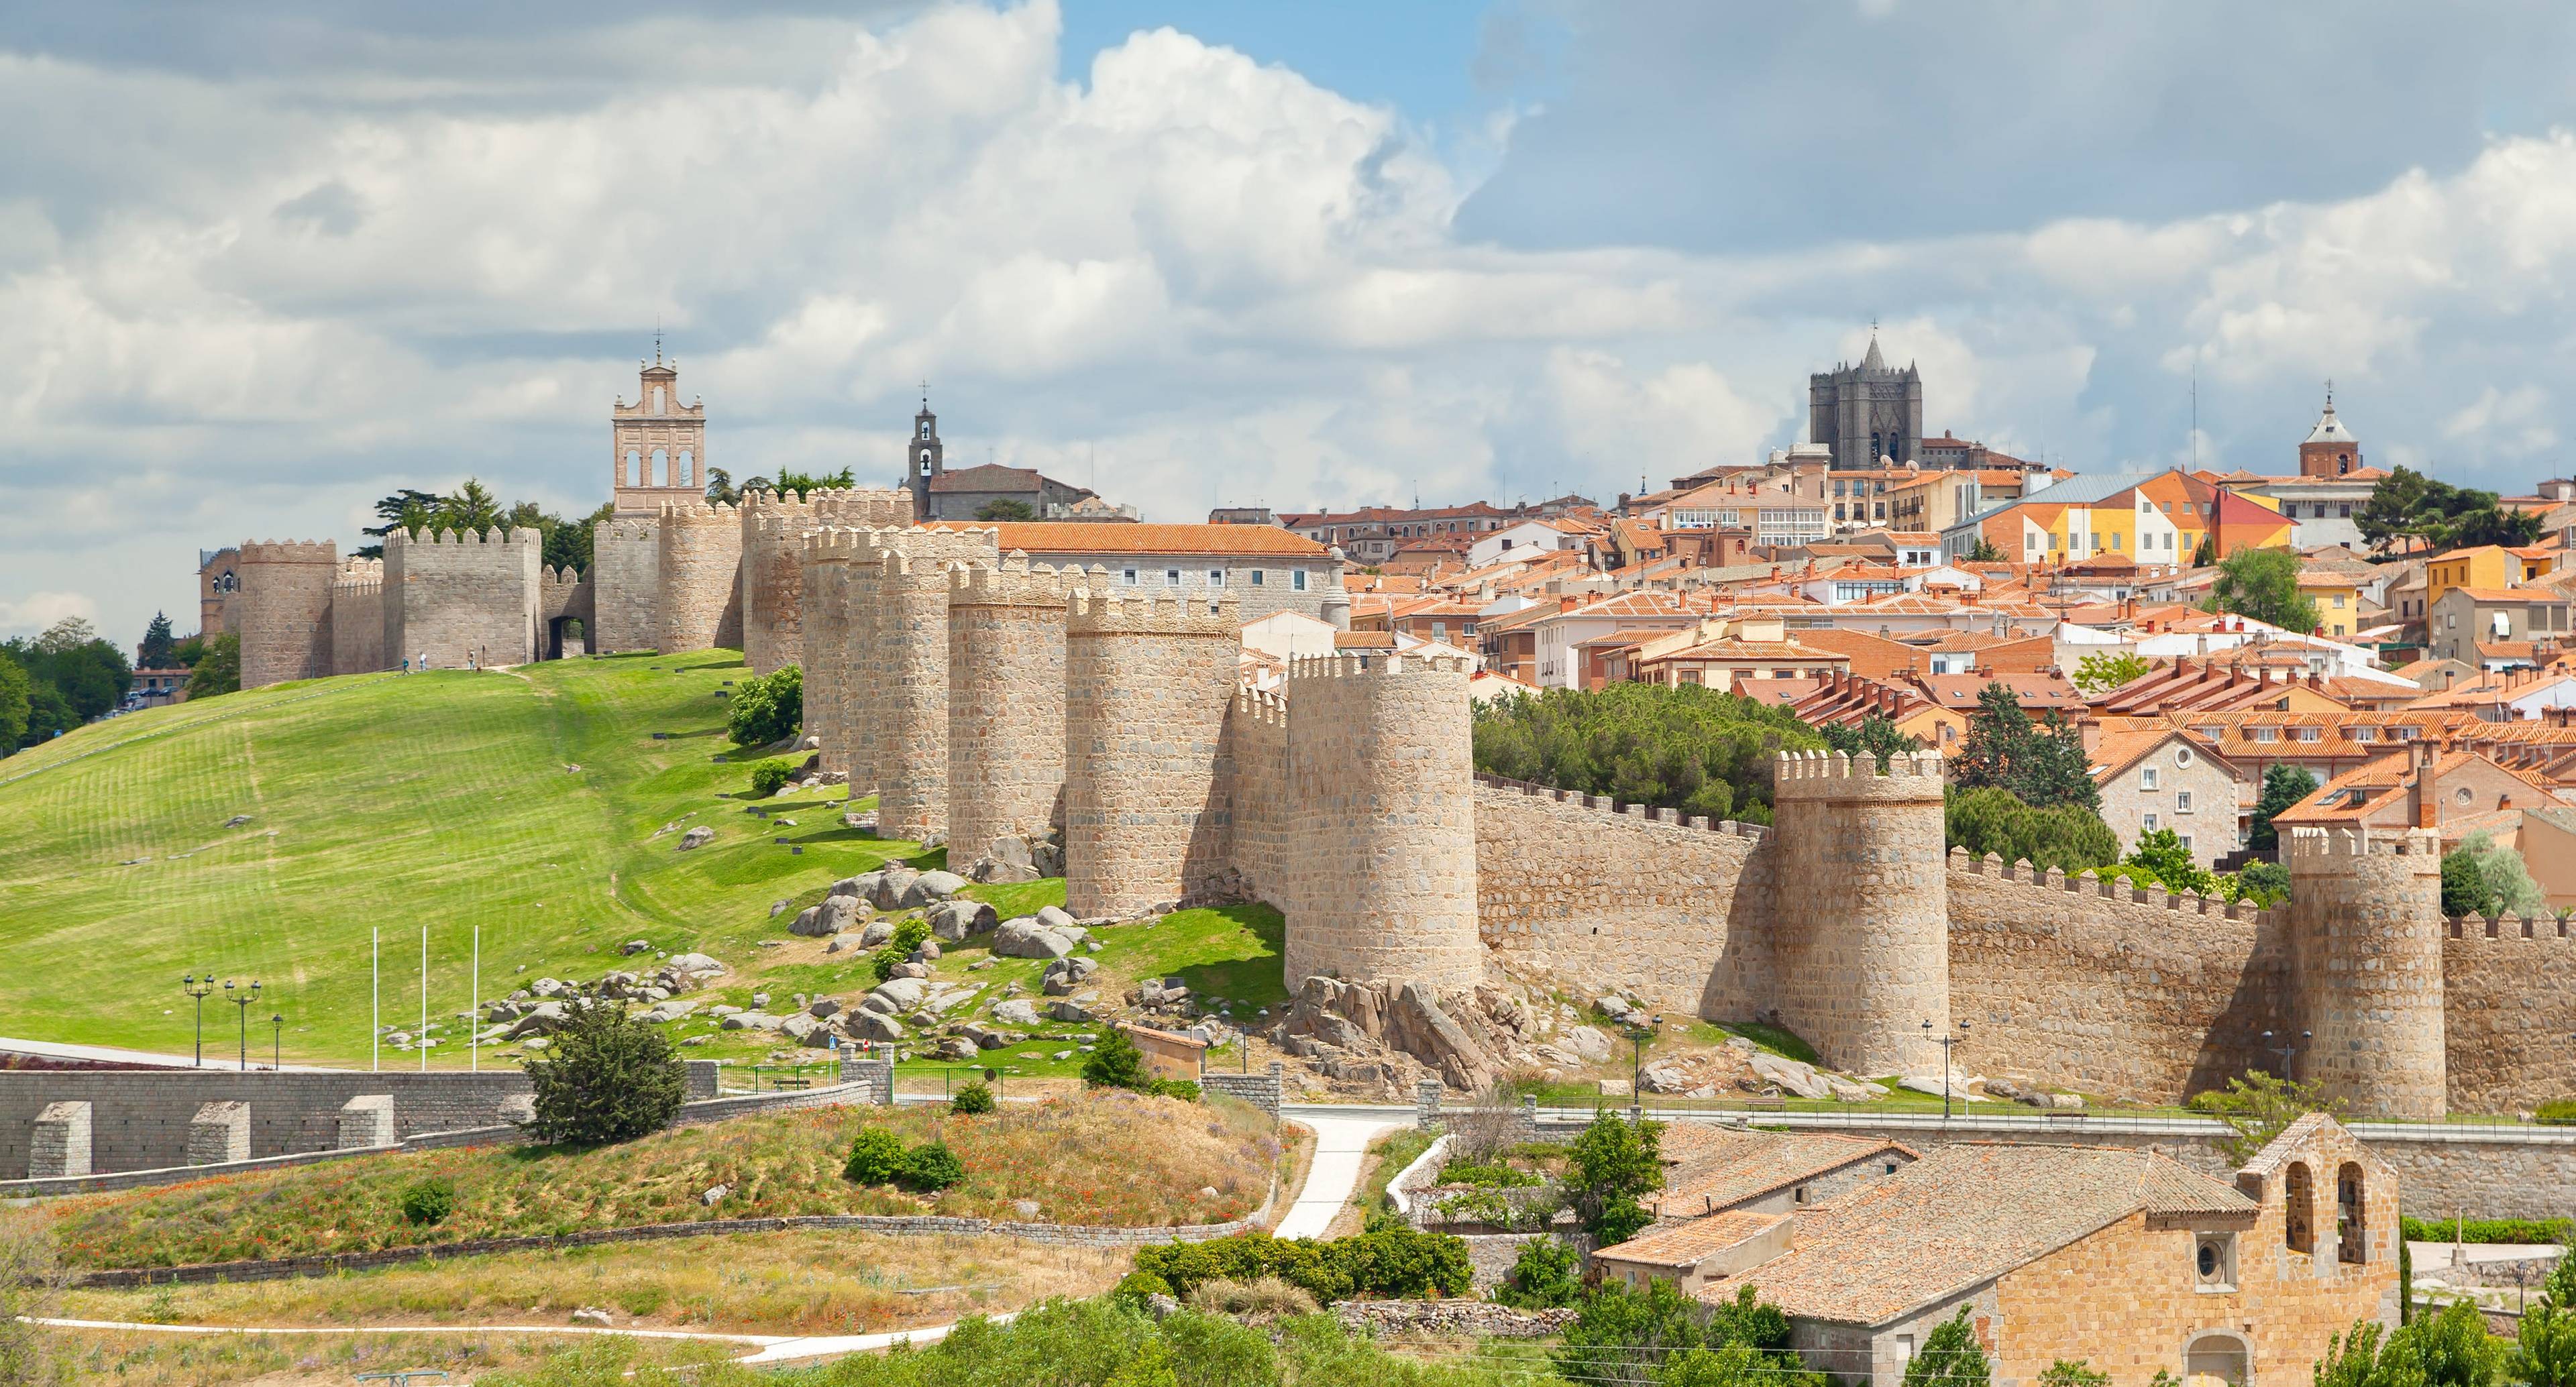 First Stop Avila, the City Surrounded by Walls